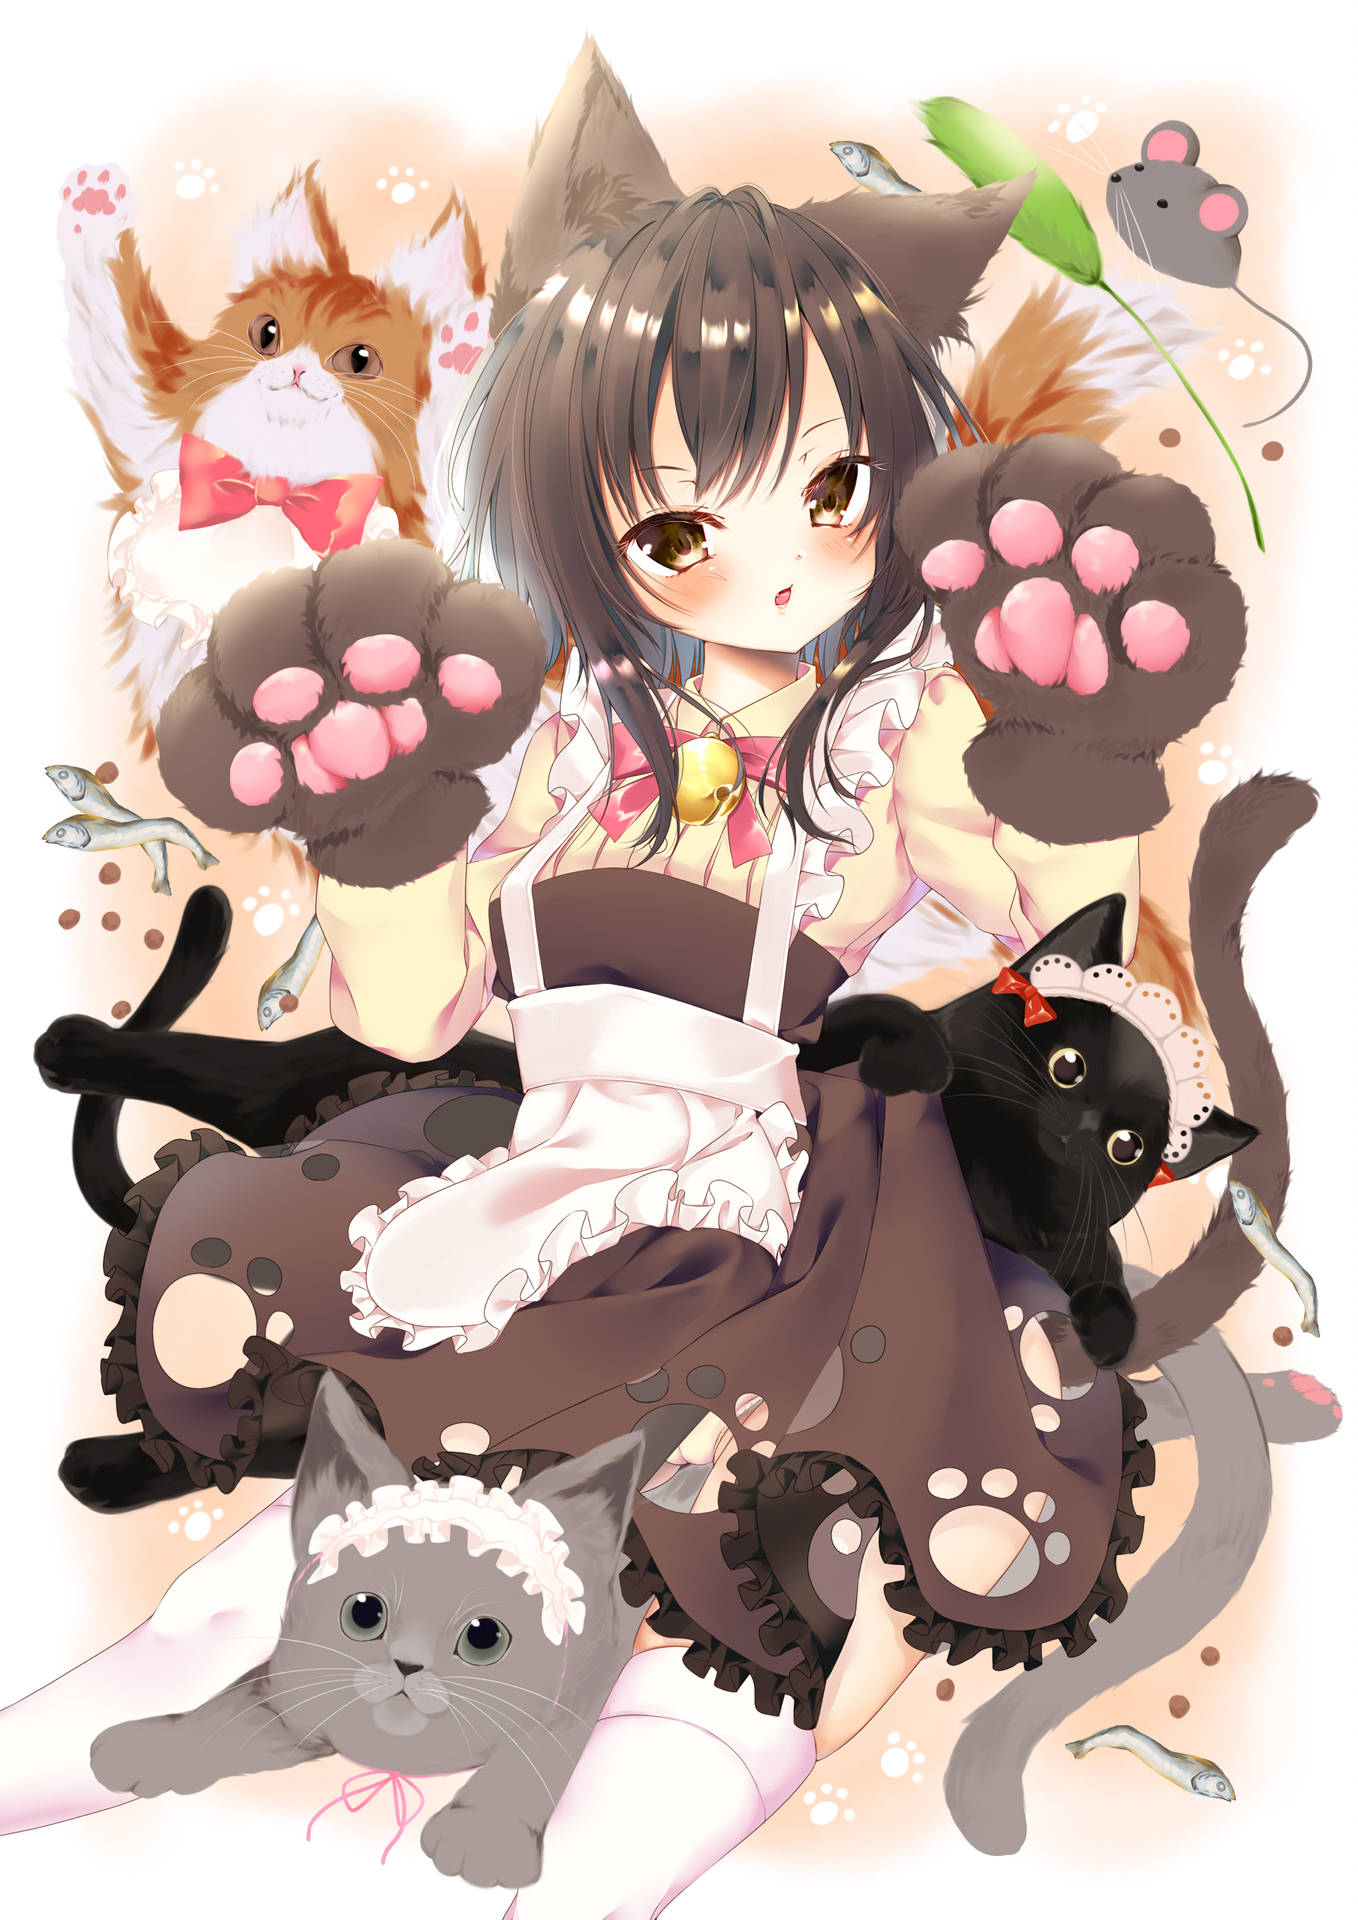 Cute Anime Girl With Cats Wallpaper